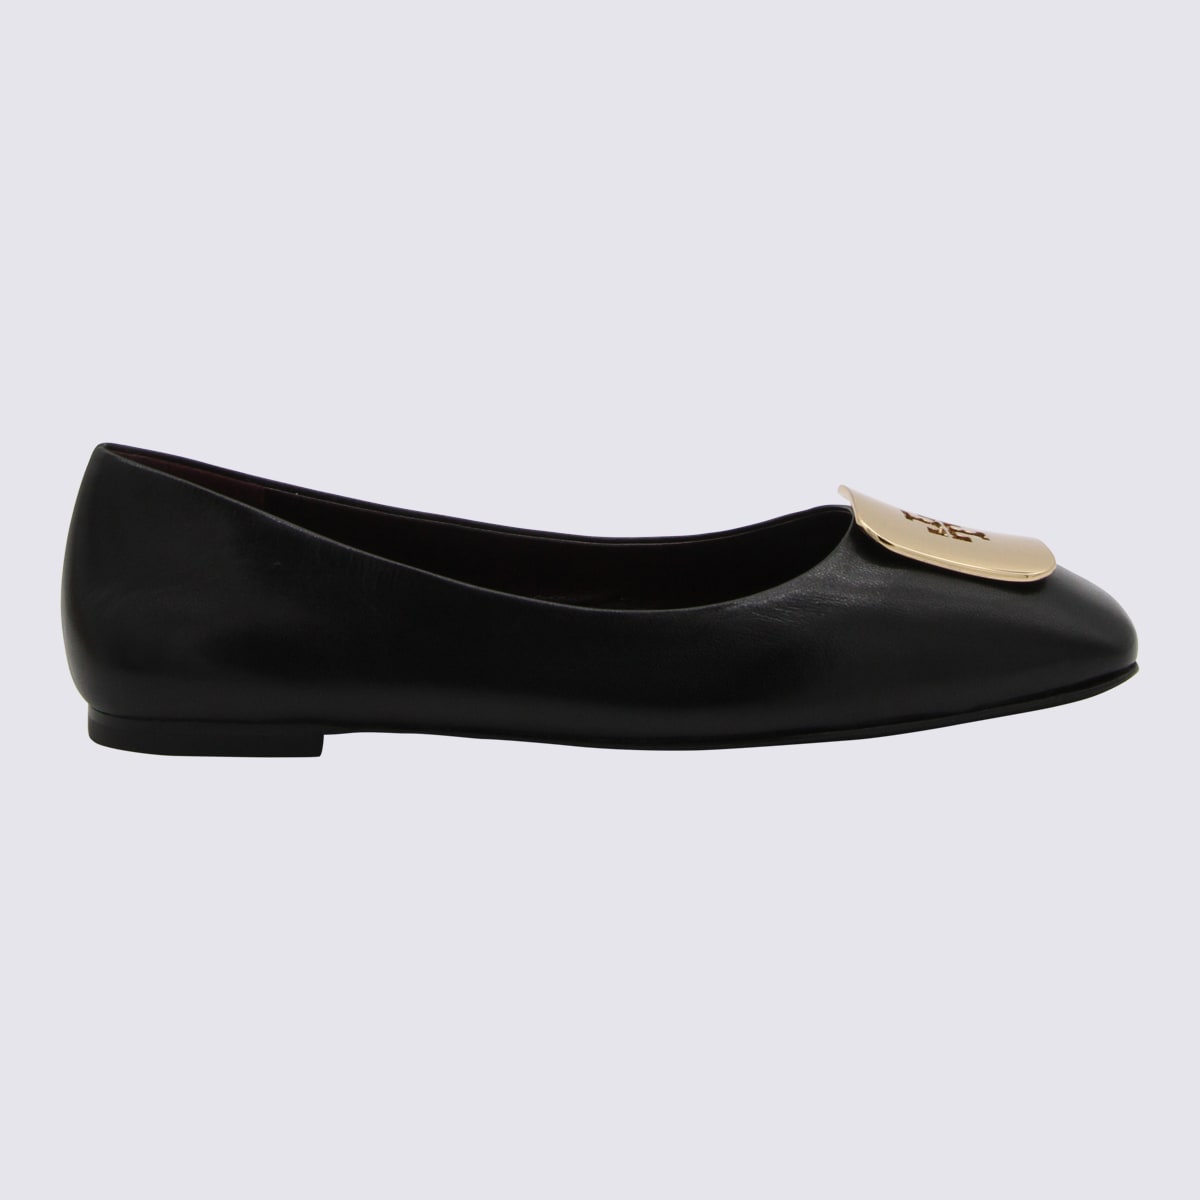 Shop Tory Burch Black Leather Ballerina Shoes